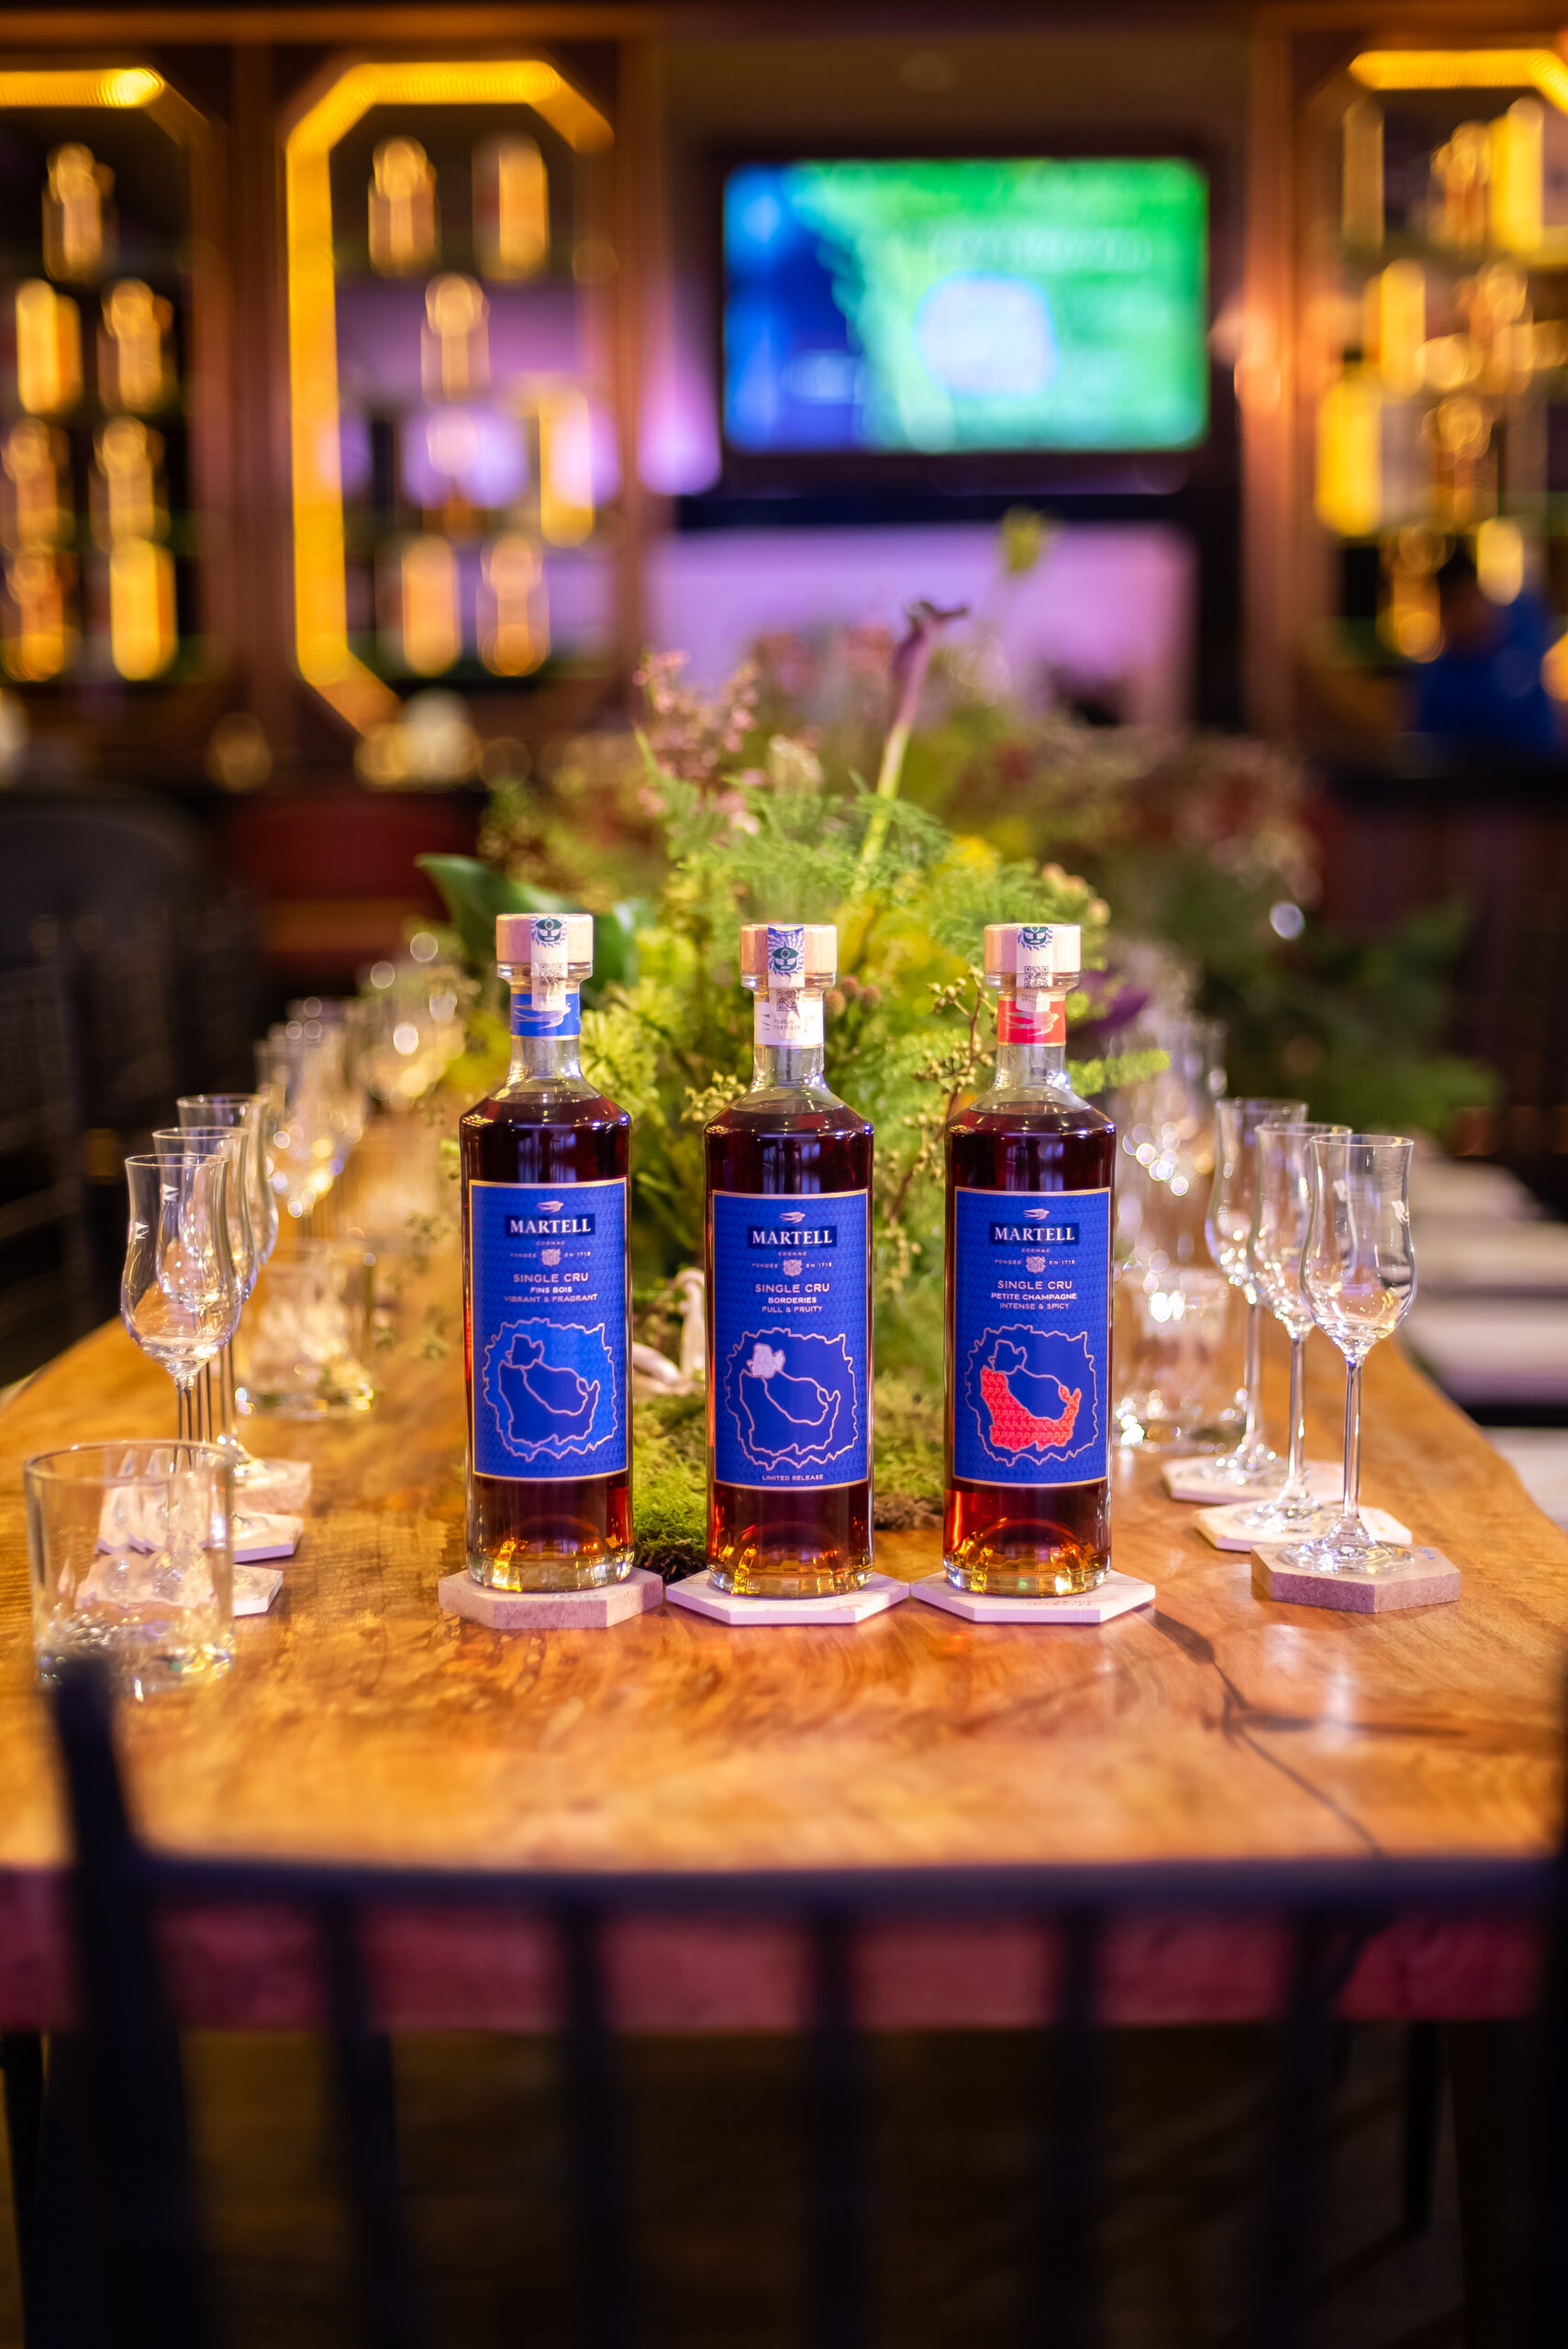 Martell single cru launch exclusive tasting